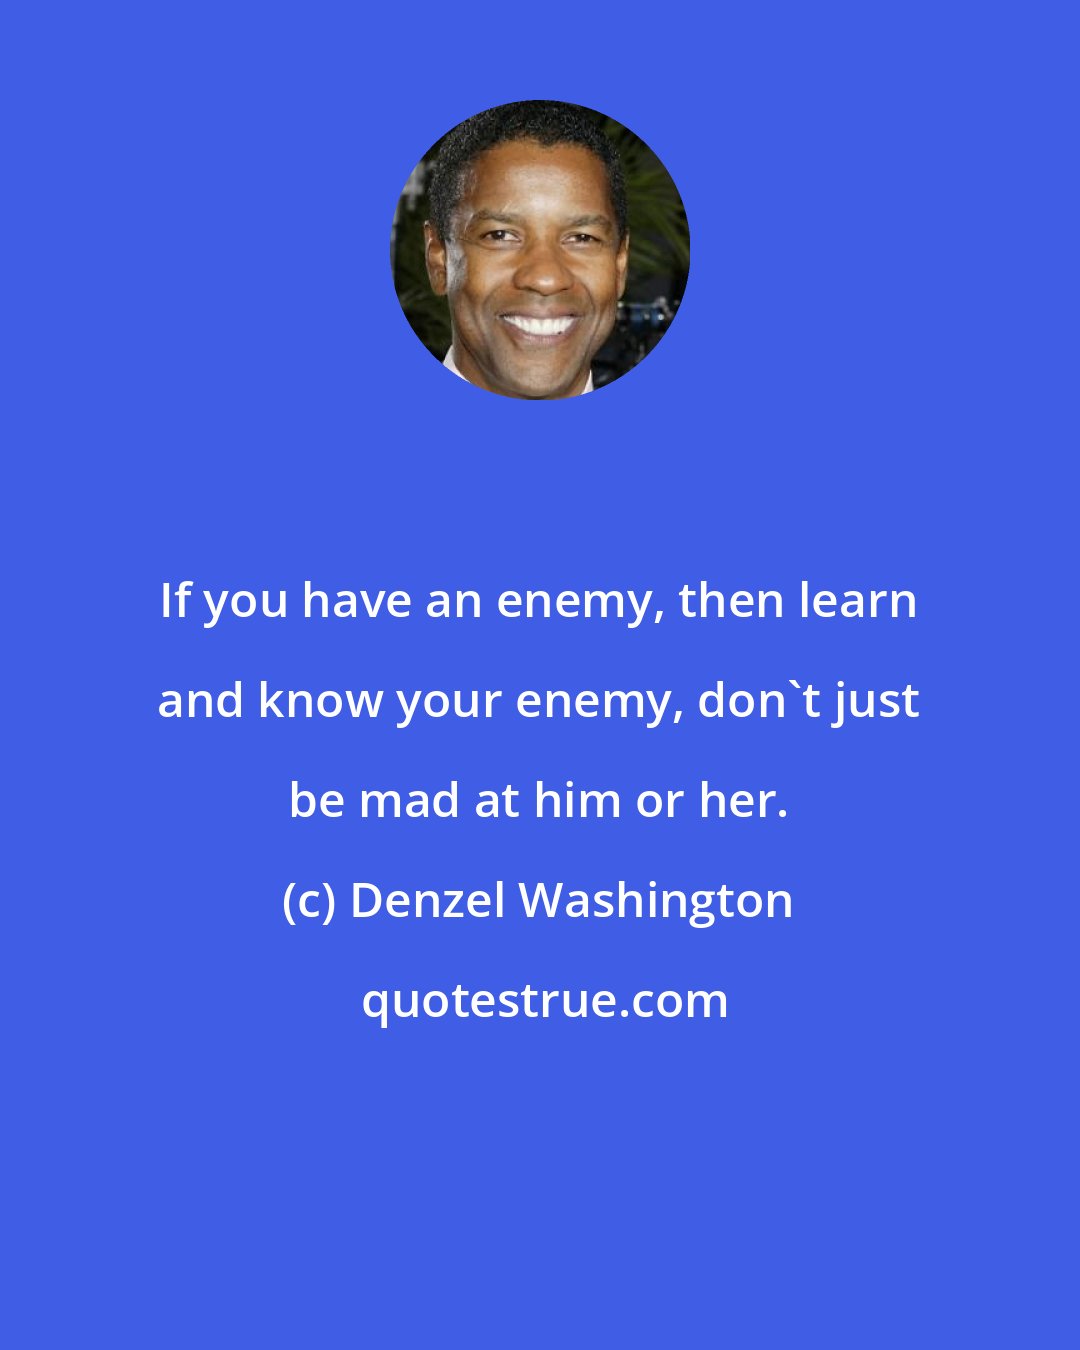 Denzel Washington: If you have an enemy, then learn and know your enemy, don't just be mad at him or her.